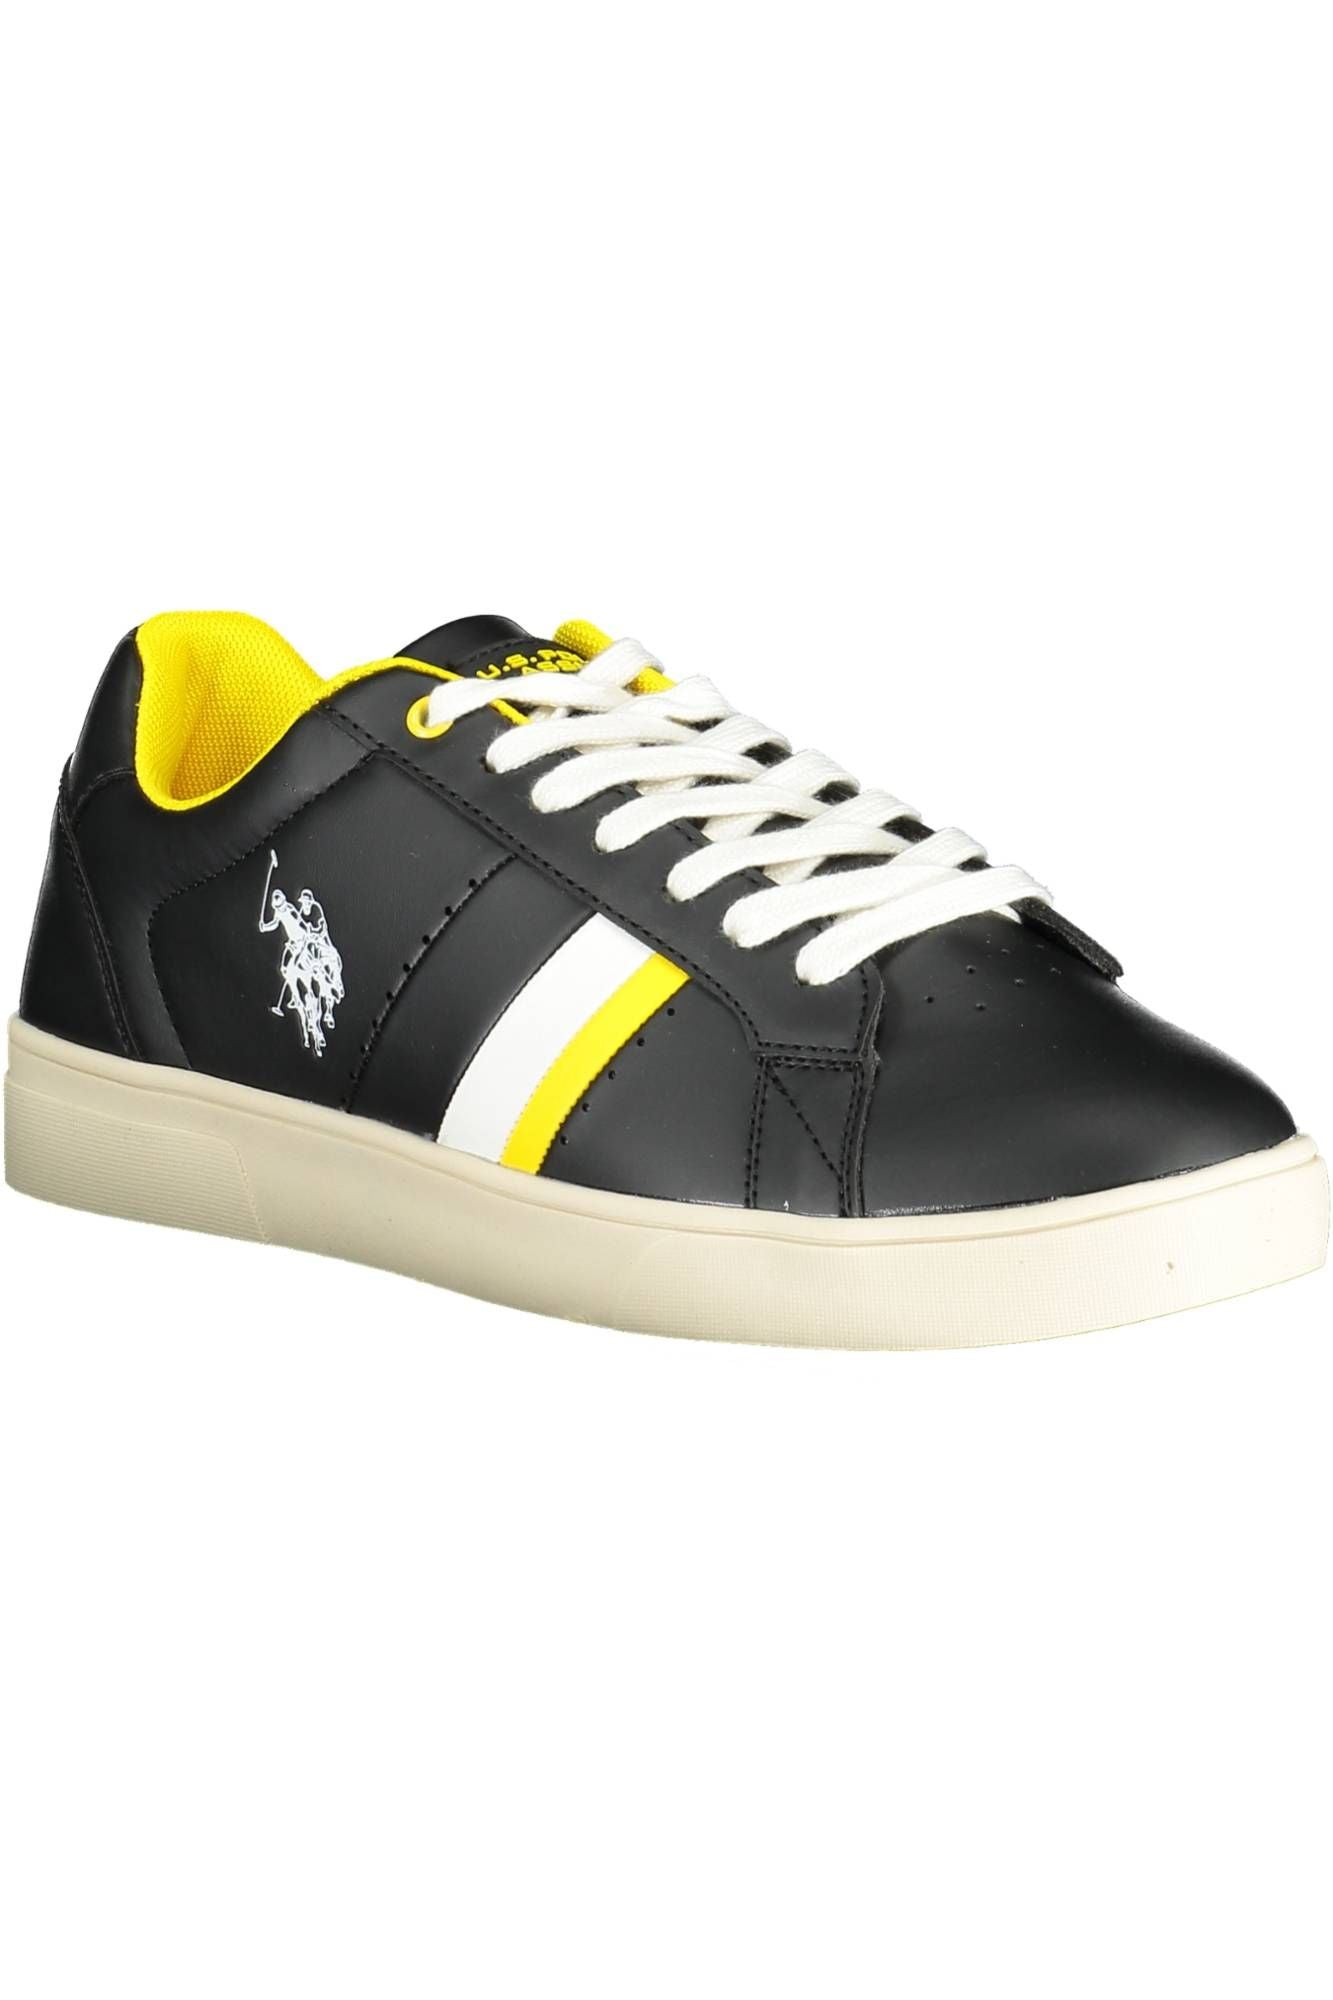 Classic Black Lace-Up Sport Sneakers